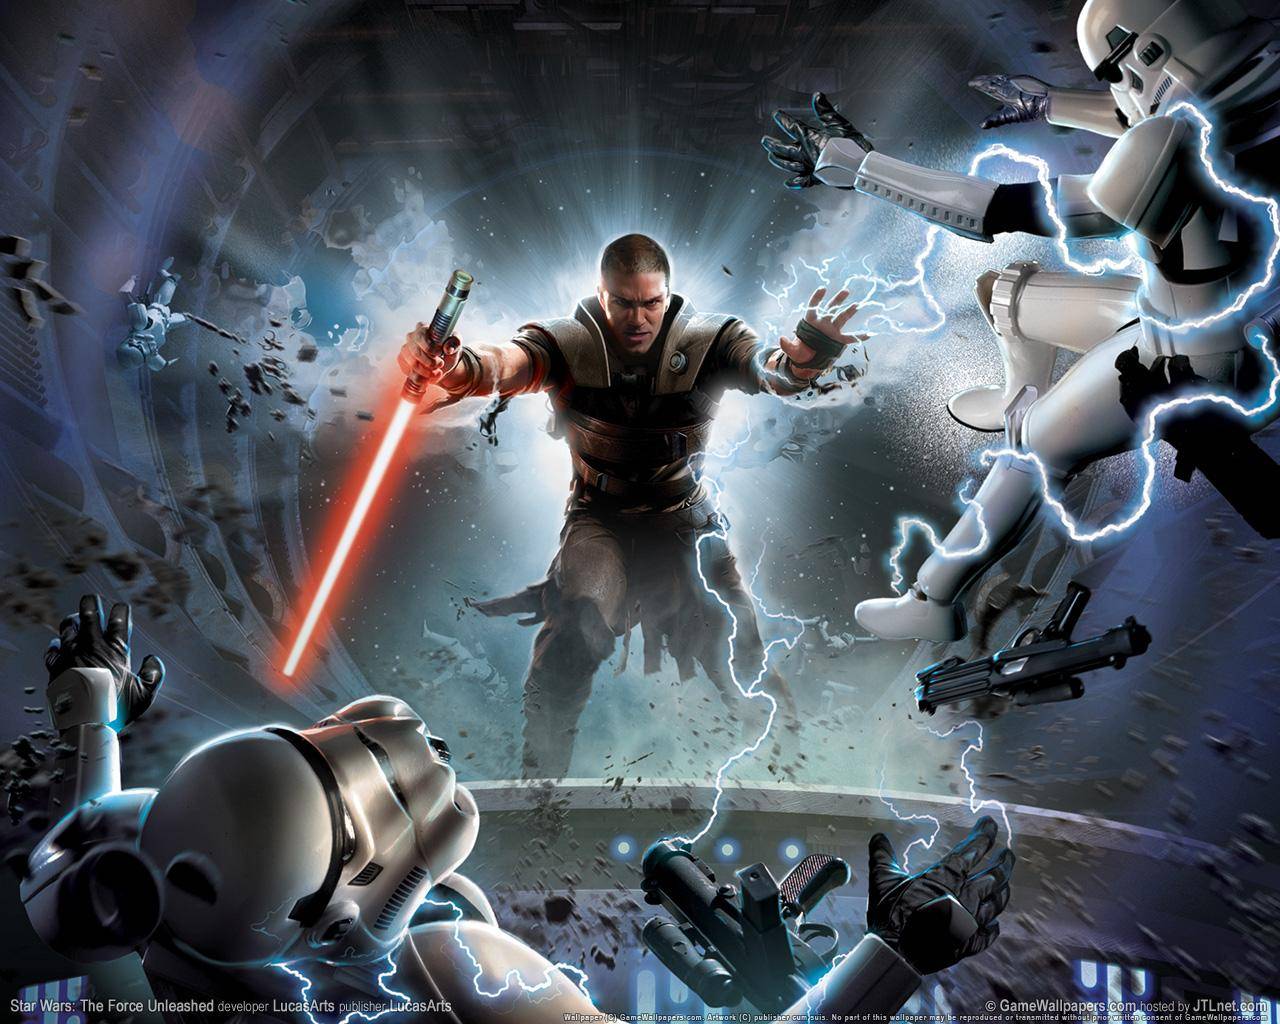 save-games-star-wars-the-force-unleashed-use-file-mod-db